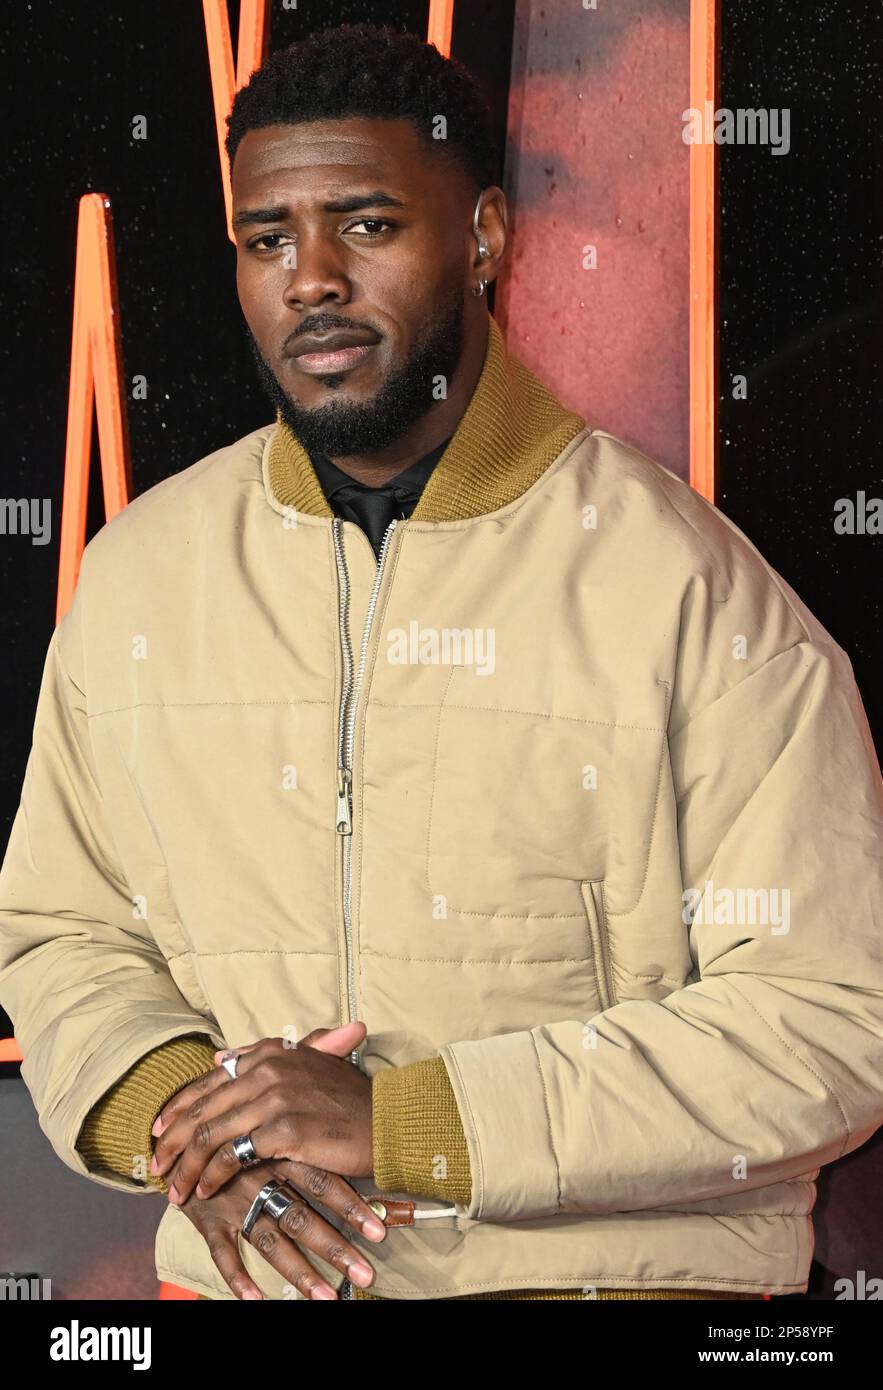 London, UK. 06/03/2023, Tega Alexander attends the UK gala screening of 'John Wick: Chapter 4 at Cineworld Leicester Square, London, UK. Photo date: 6th March 2023. UK gala screening of 'John Wick: Chapter 4 at Cineworld Leicester Square, London, UK. Photo date: 6th March 2023. attends the UK gala screening of 'John Wick: Chapter 4 at Cineworld Leicester Square, London, UK. Photo date: 6th March 2023. Stock Photo